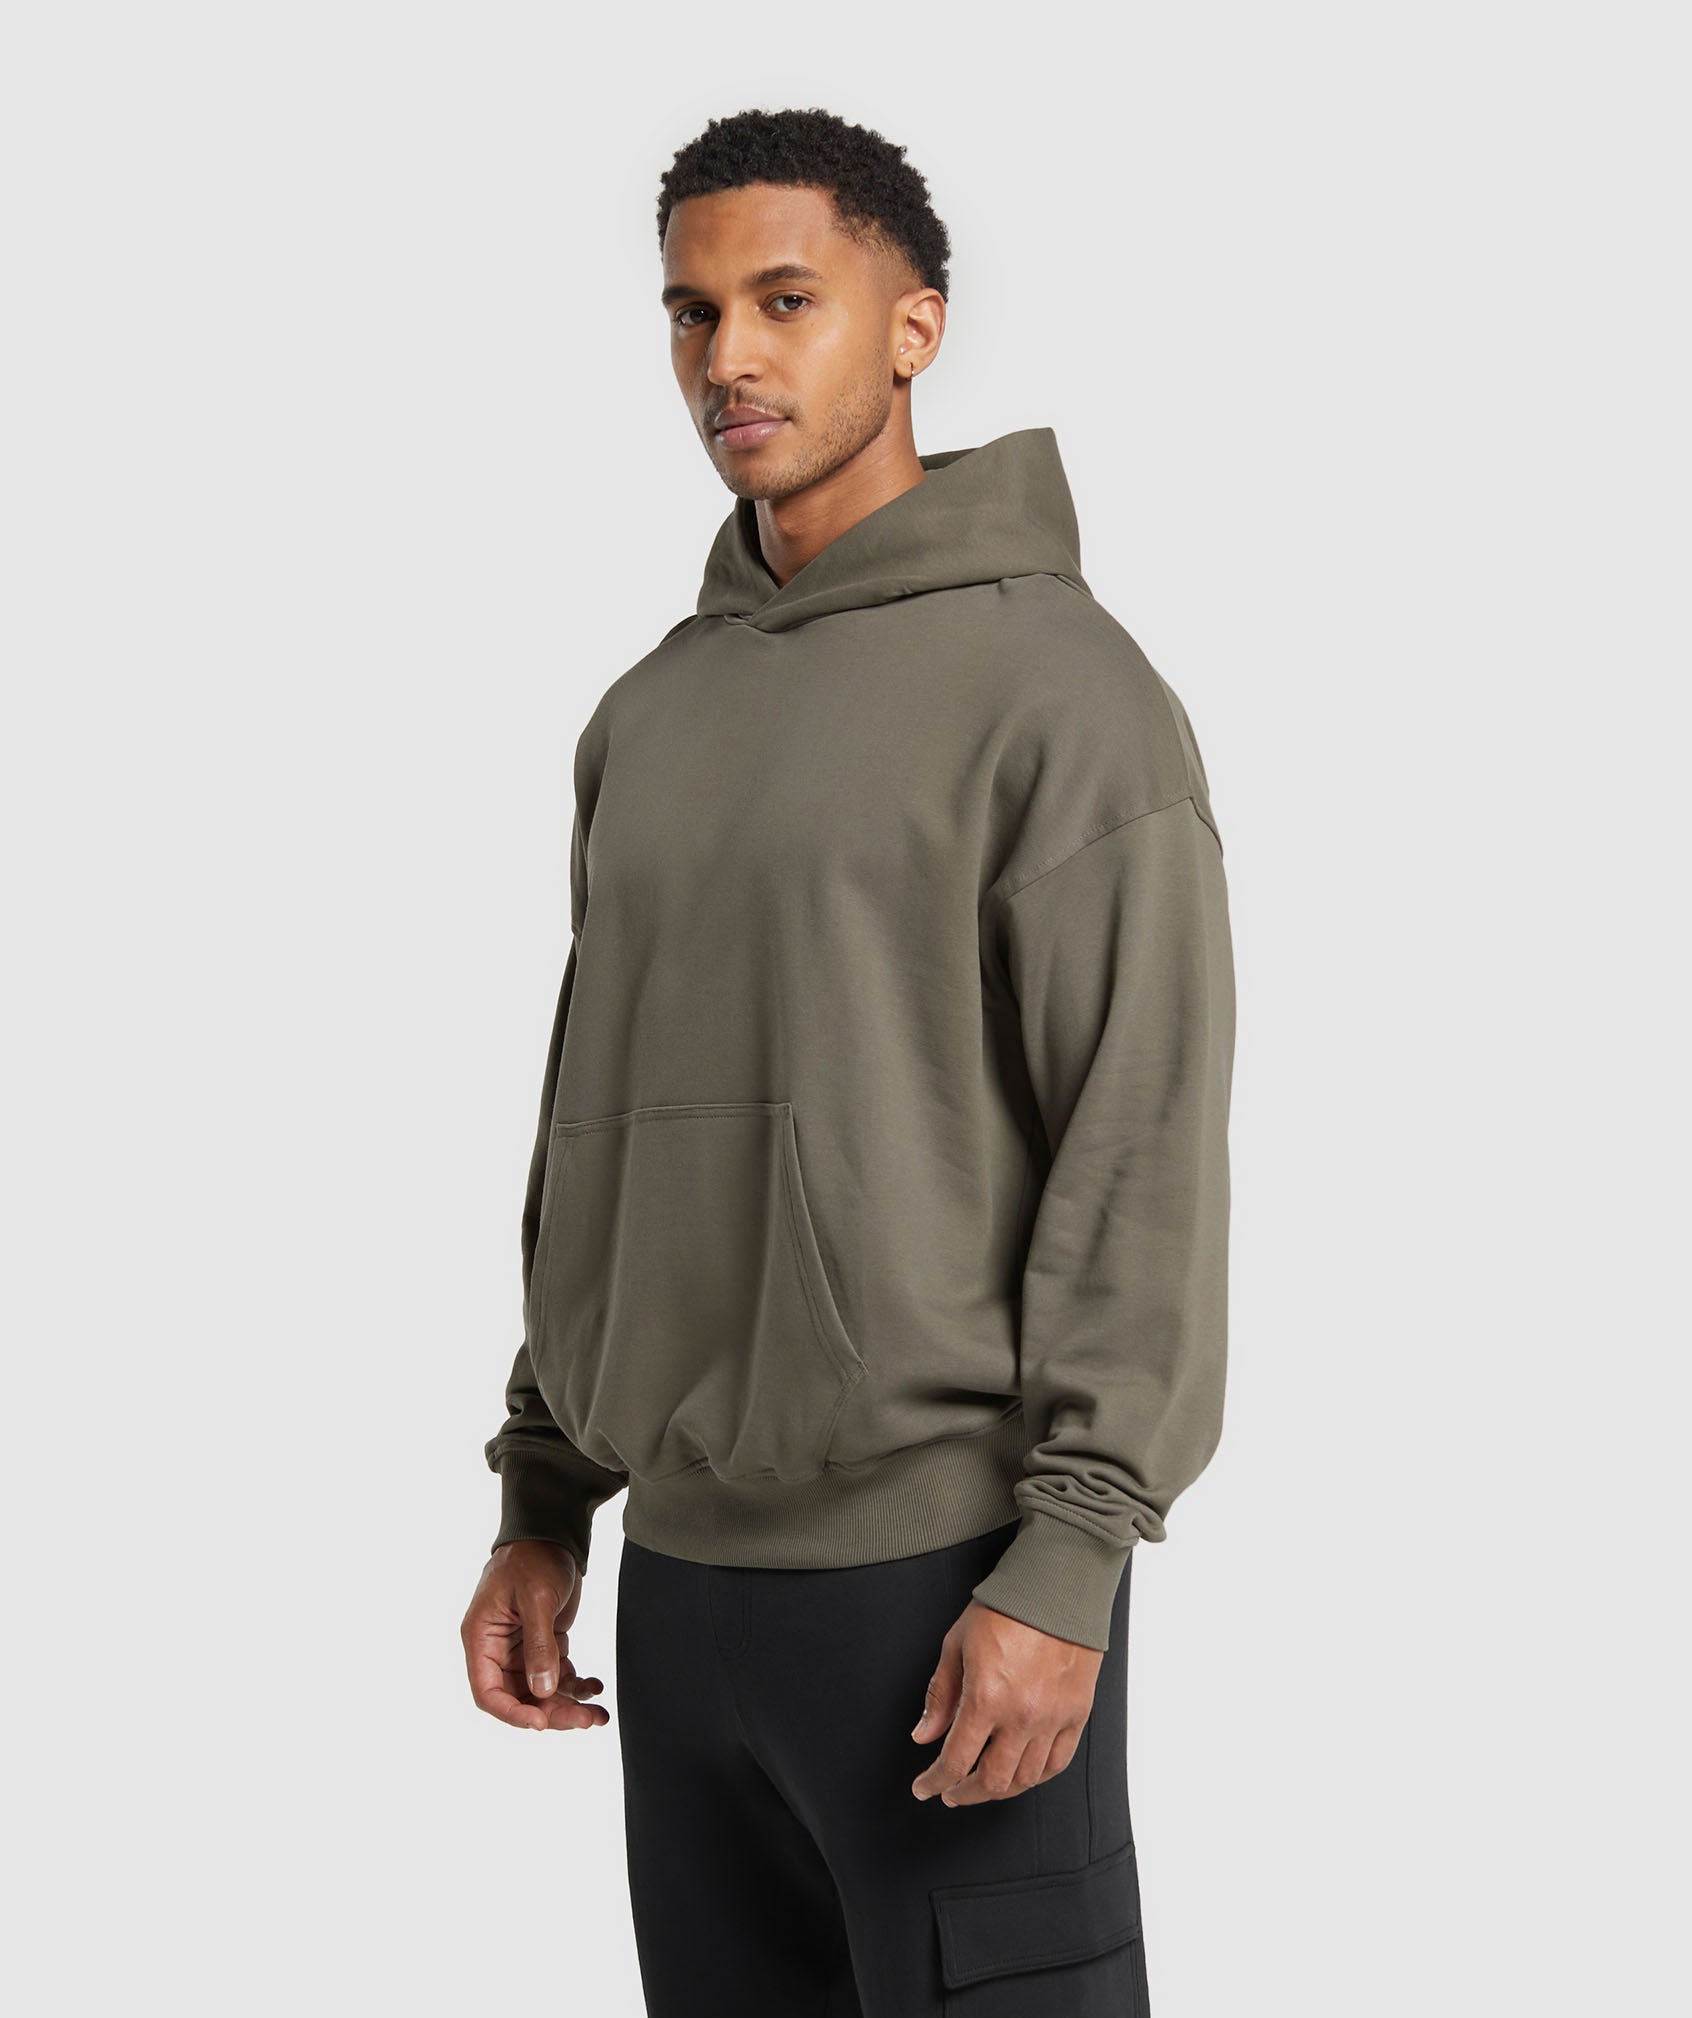 Rest Day Essentials Hoodie in Camo Brown - view 2